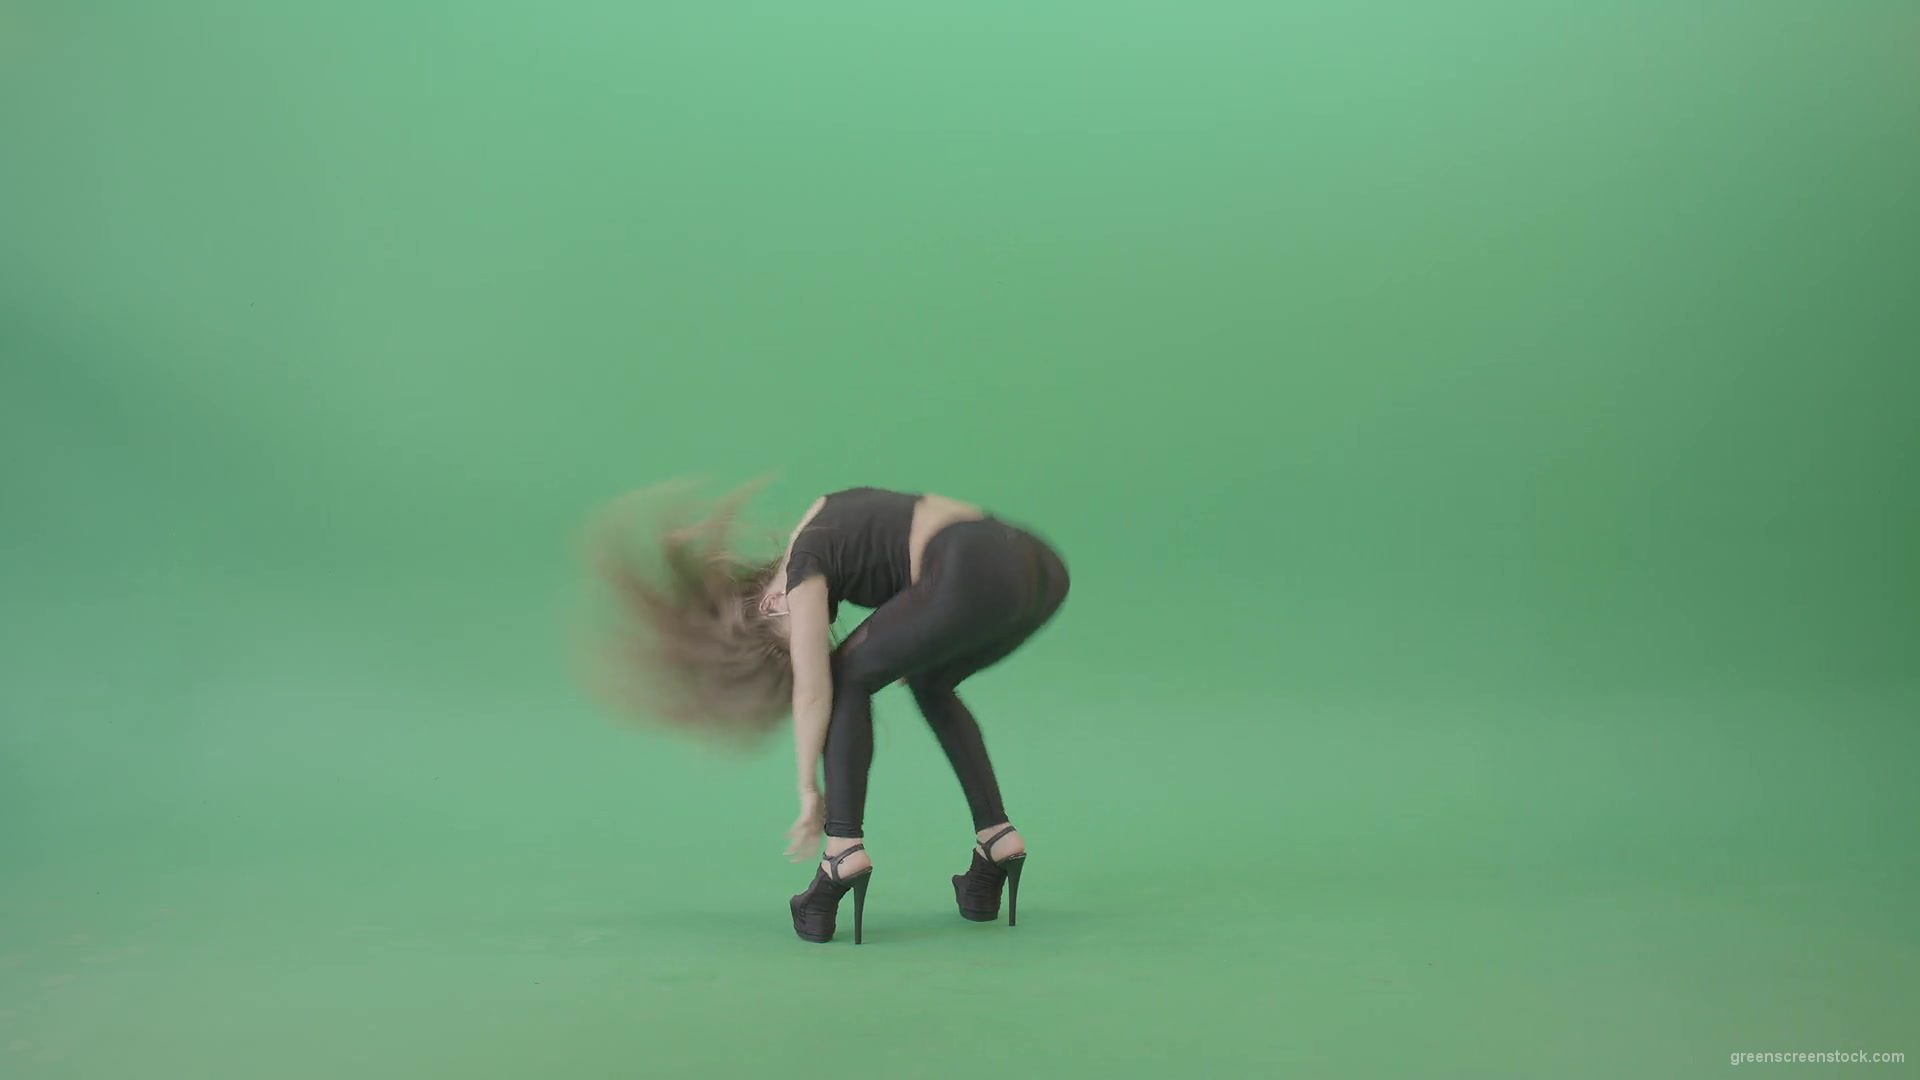 Exotic-sexy-dance-by-girl-in-black-latex-dress-isolated-on-green-screen-4K-Video-Footage-1920_005 Green Screen Stock